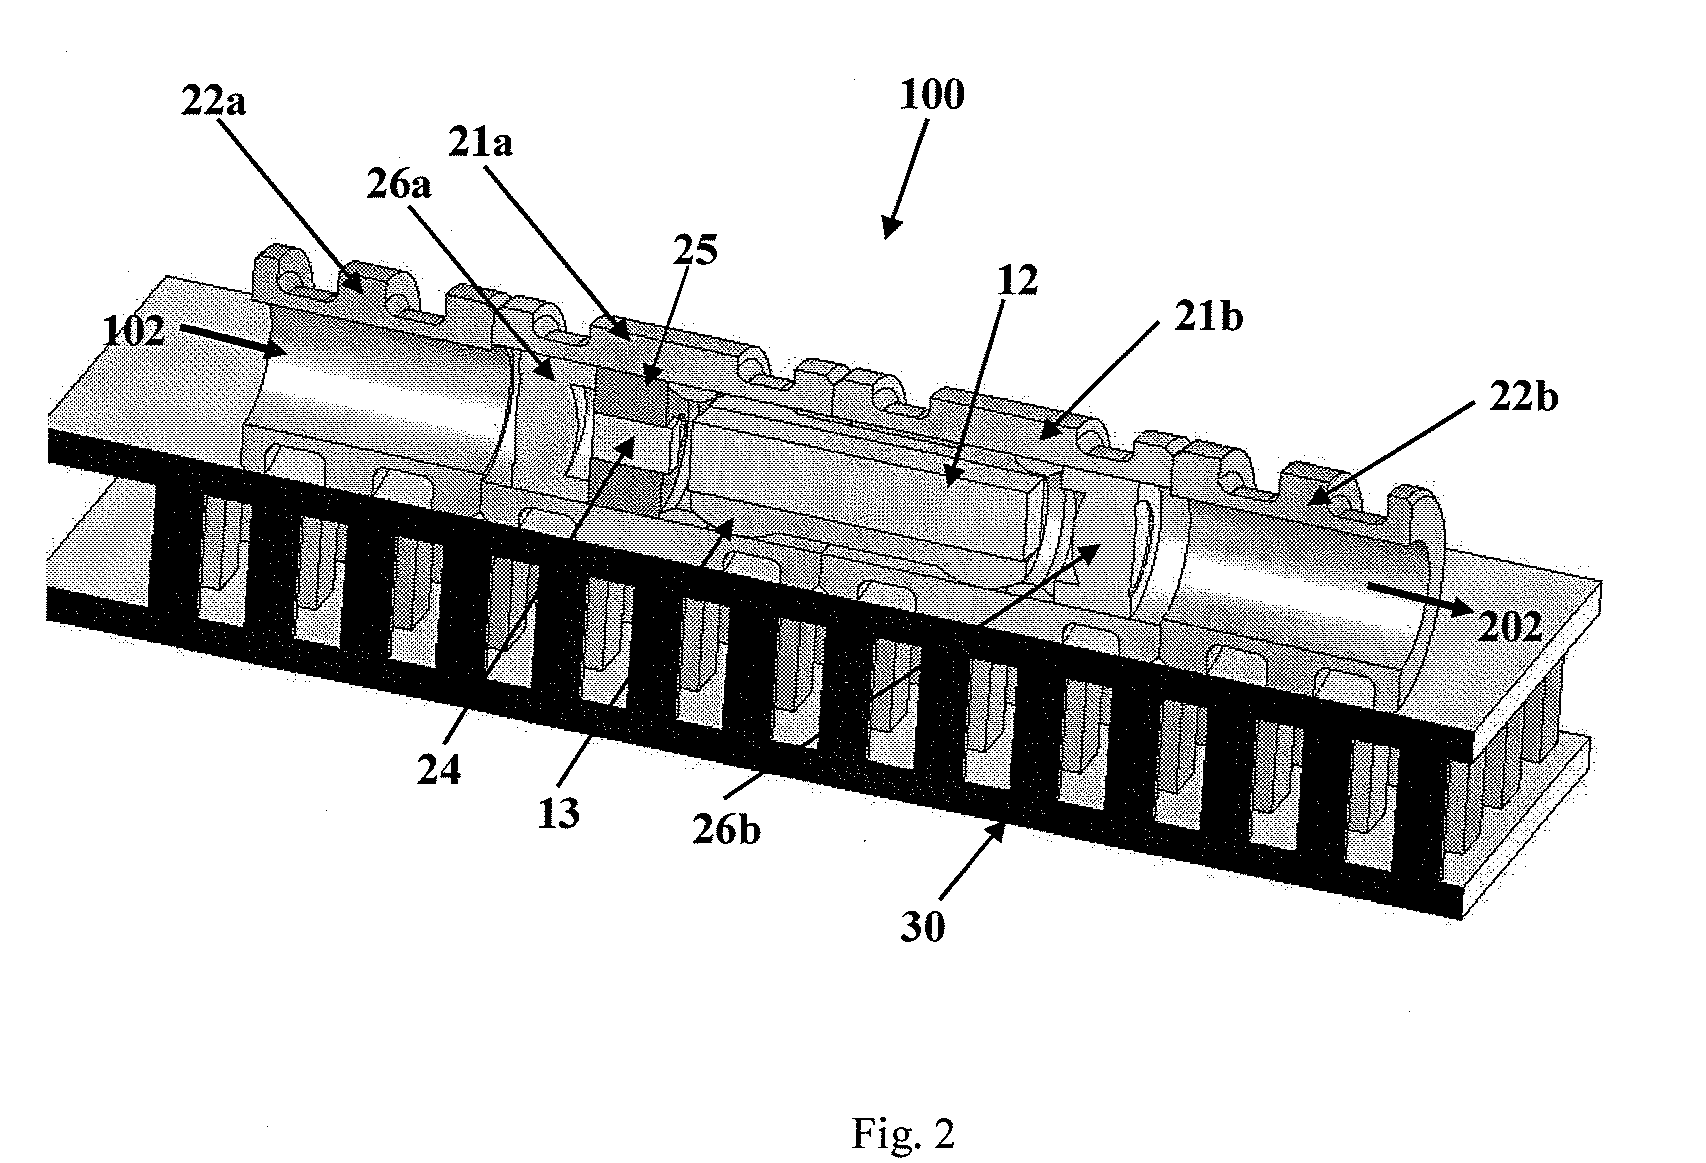 Modular Solid-State Laser Platform Based On Coaxial Package And Corresponding Assembly Process